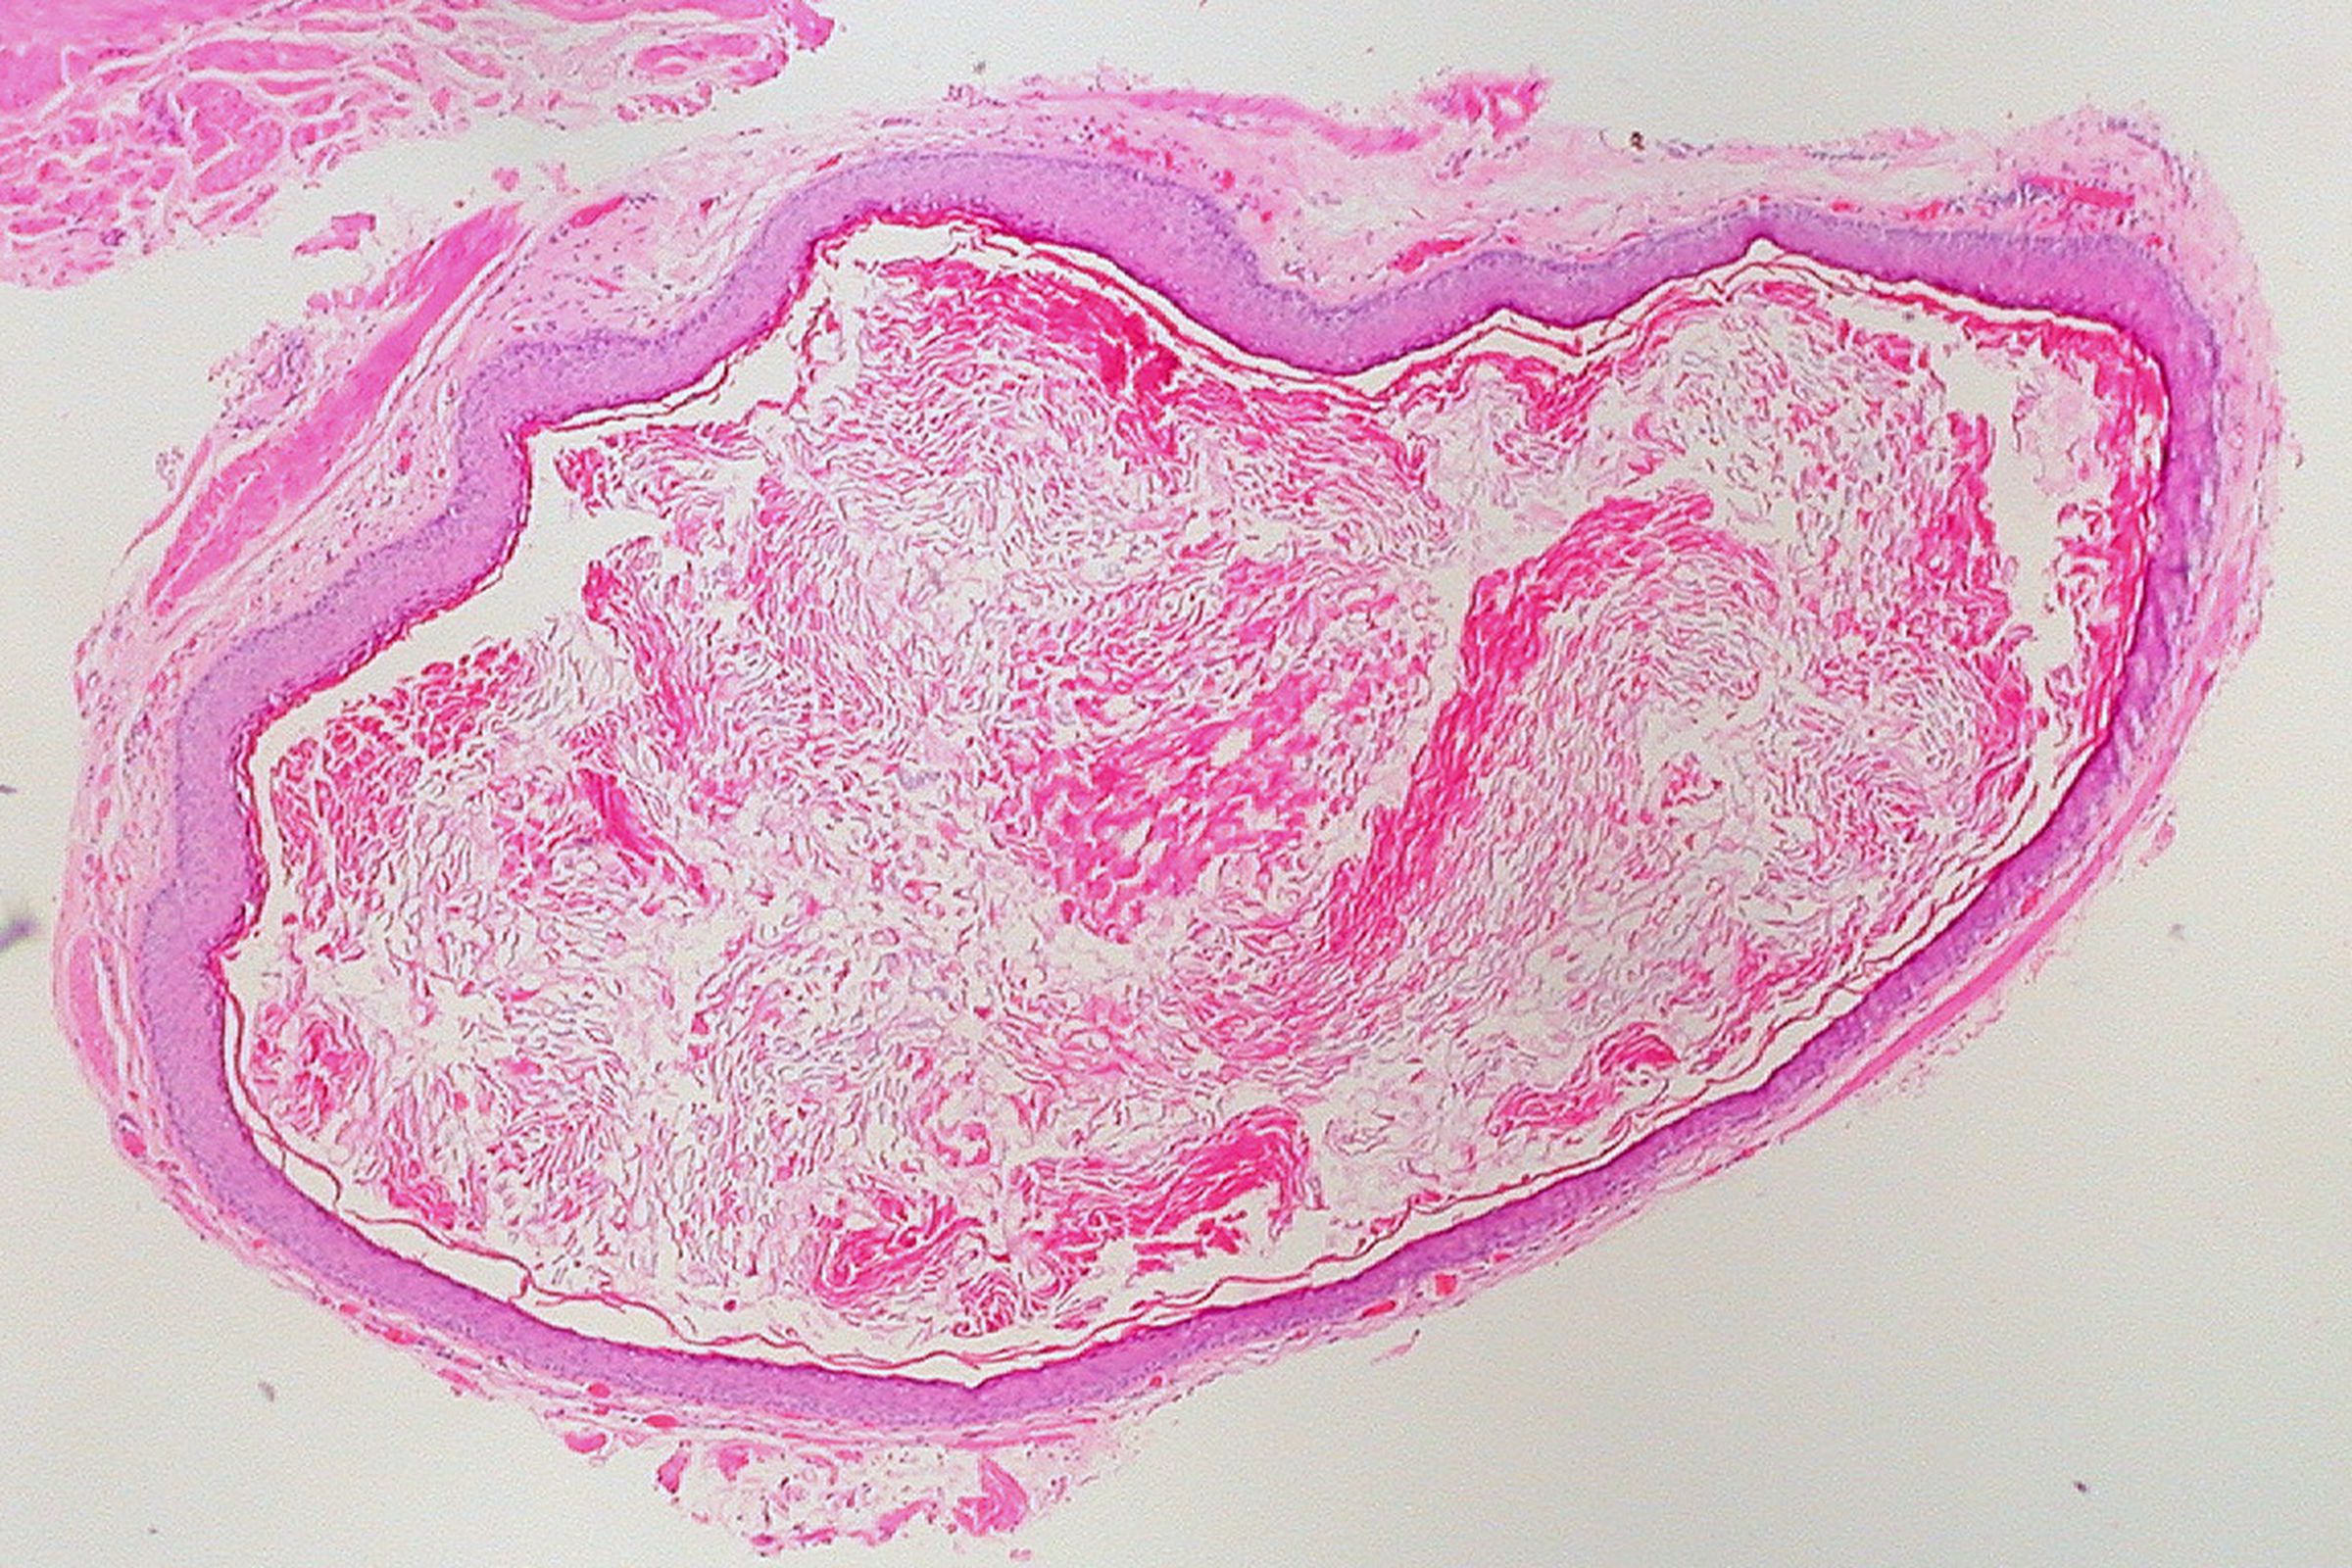 An epidermoid cyst, stained and under the microscope